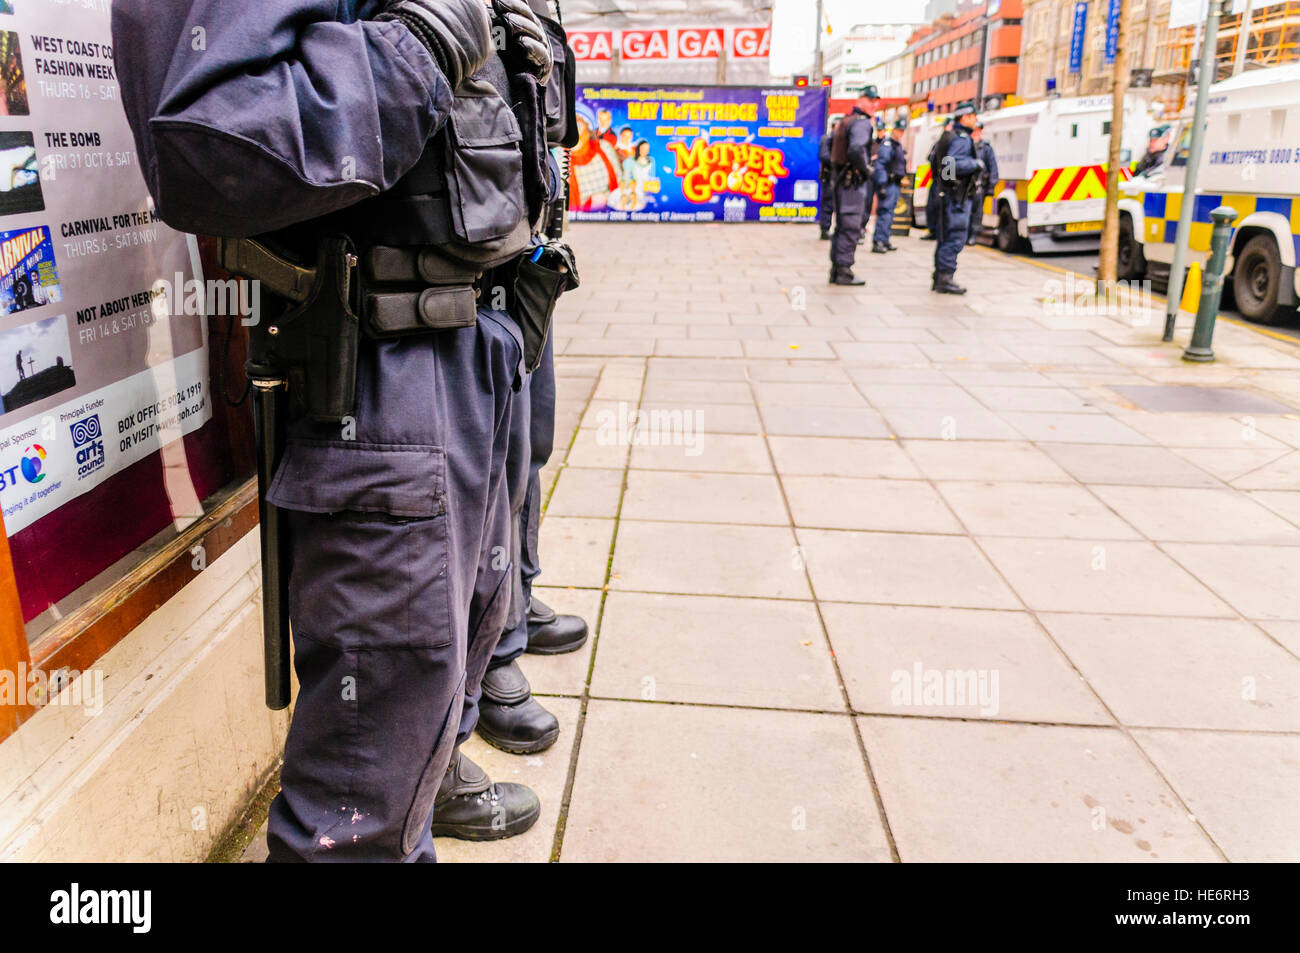 Two armed police officers from the PSNI stand guard during an event where civil unrest is possible. Stock Photo